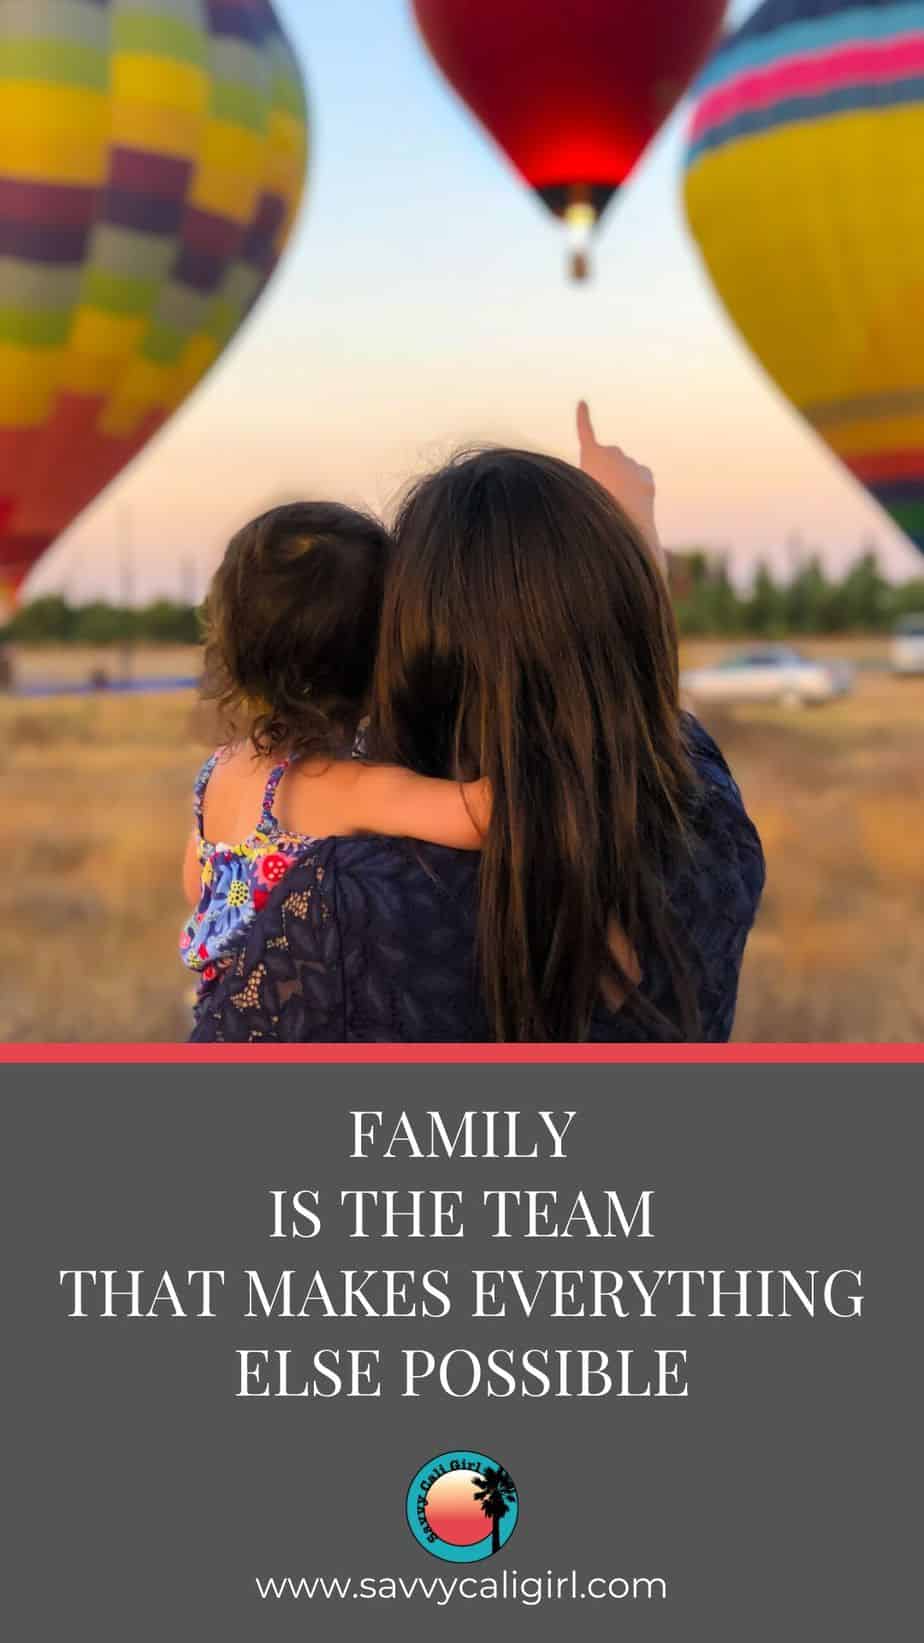 Teamwork: Family, The Team That Makes Everything Possible